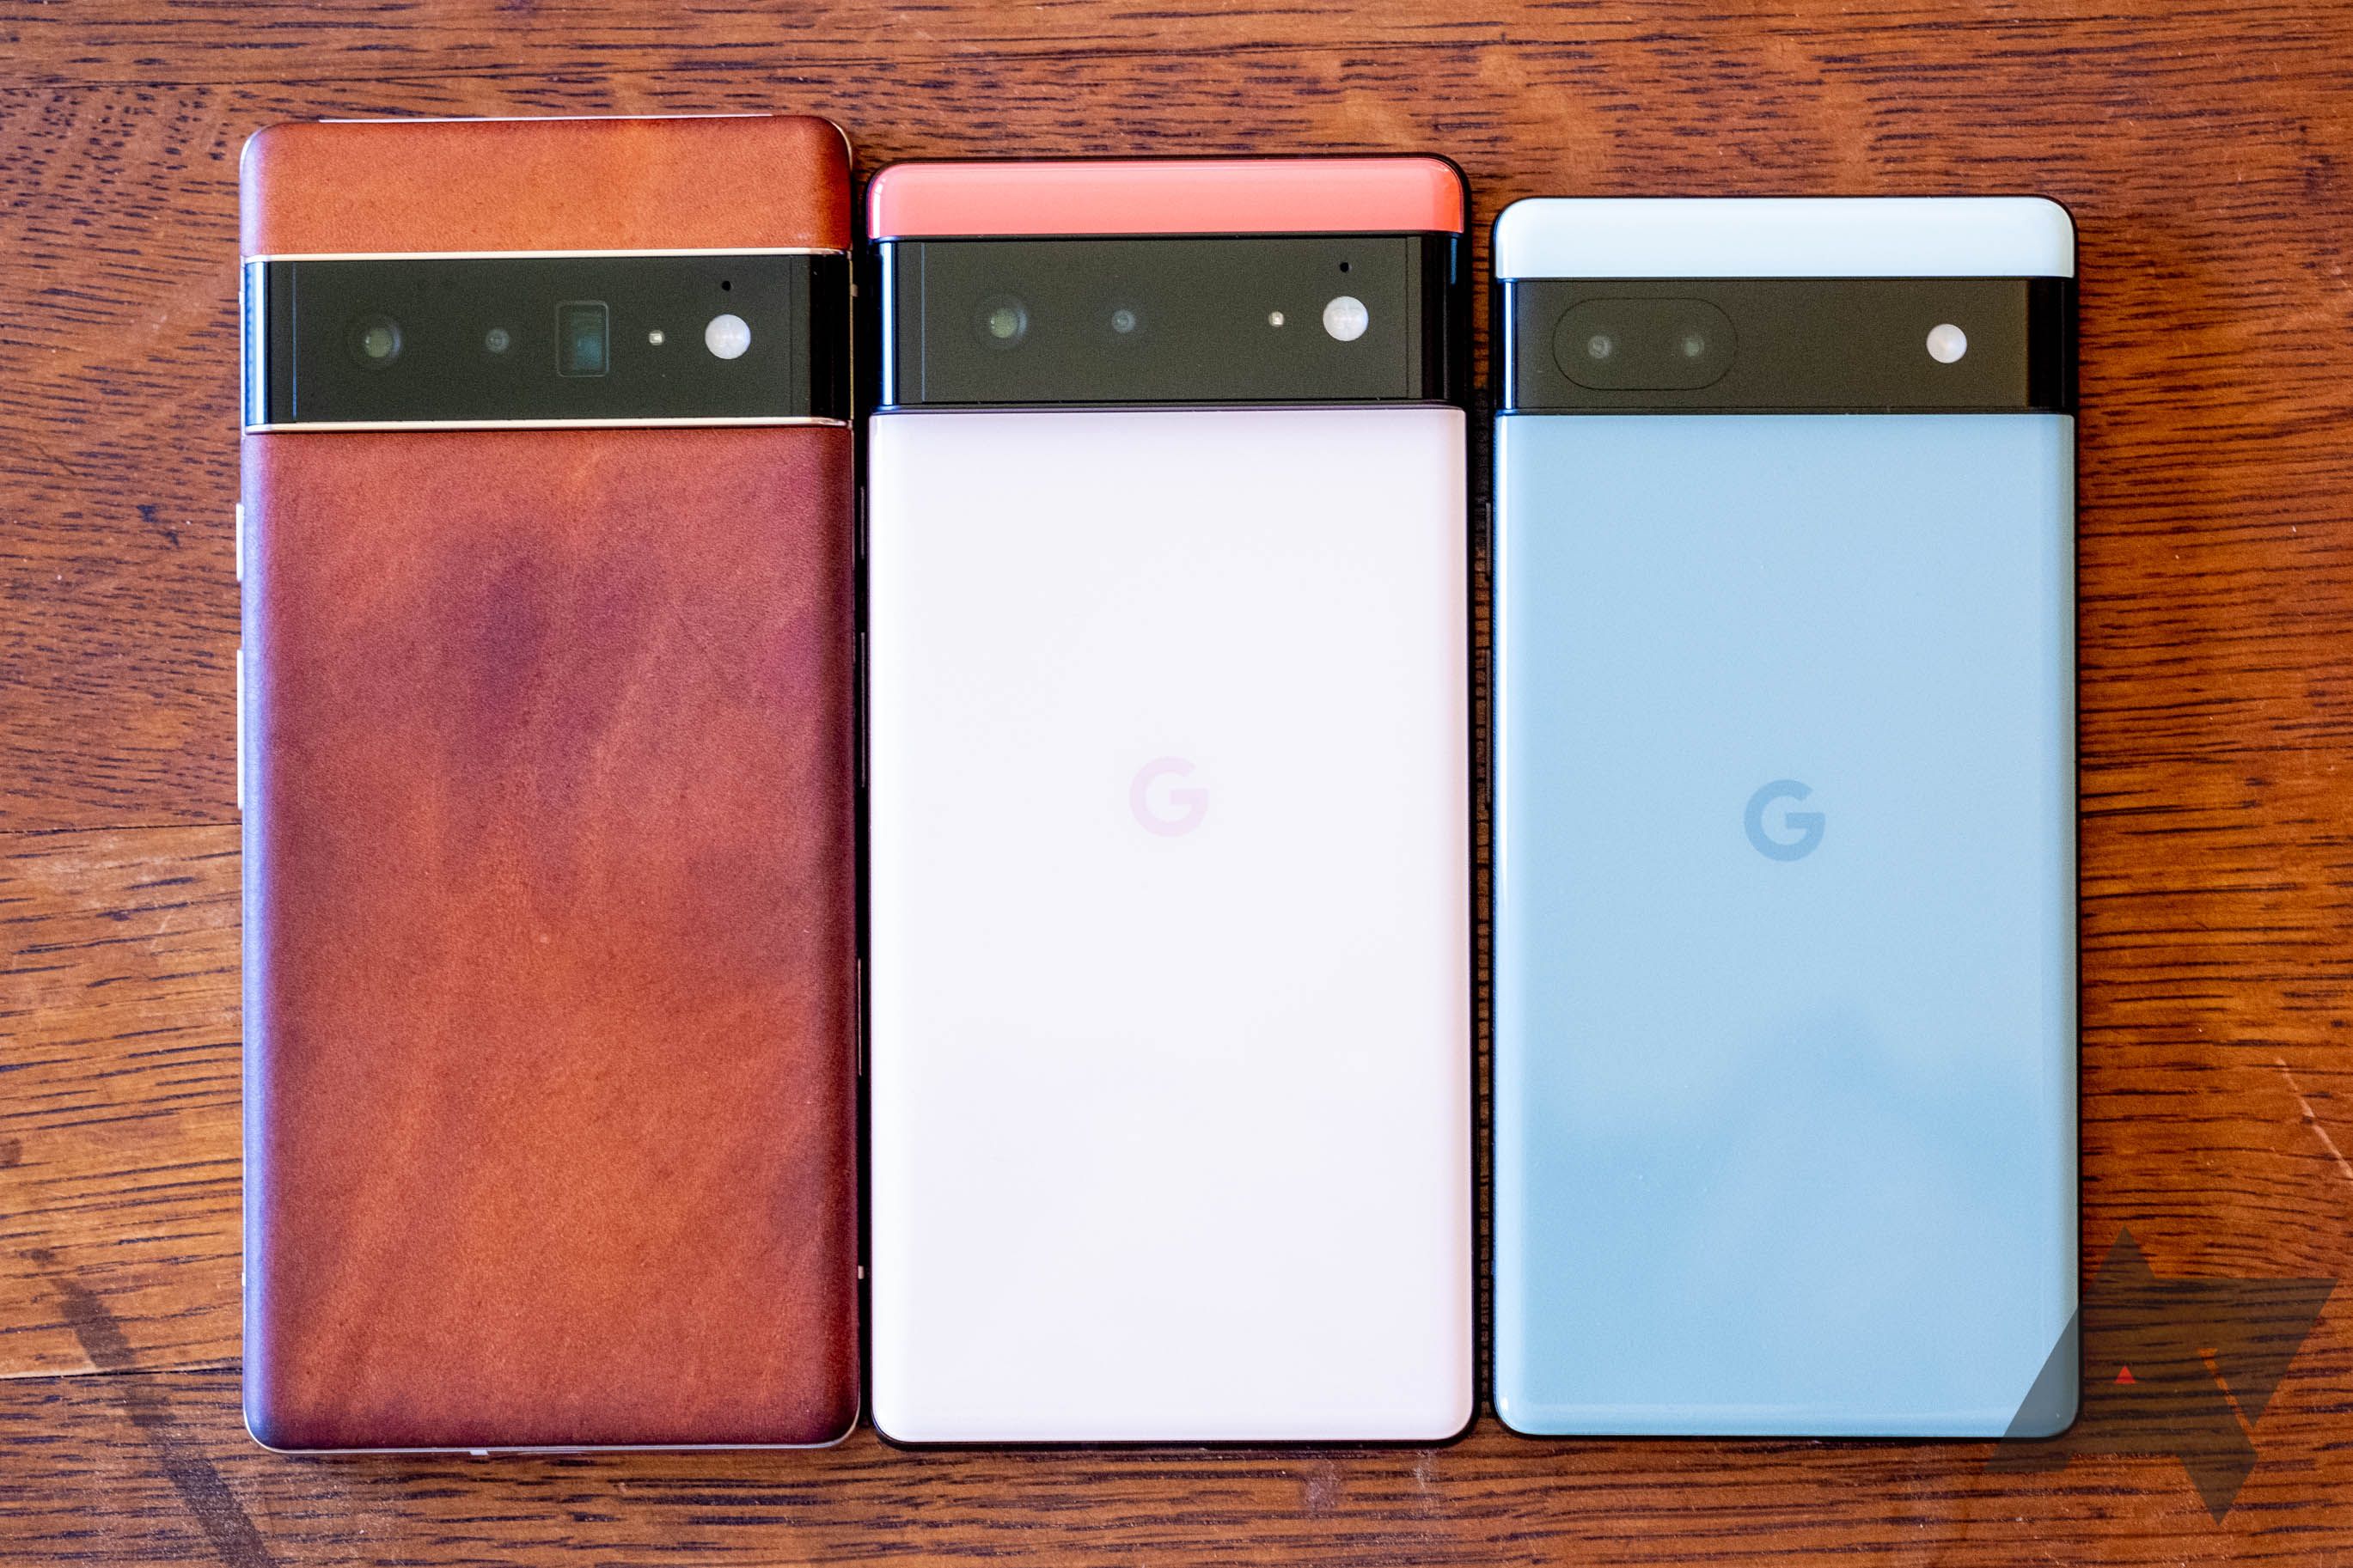 The Pixel 6 Pro, Pixel 6, and Pixel 6a facebdown on a wooden table